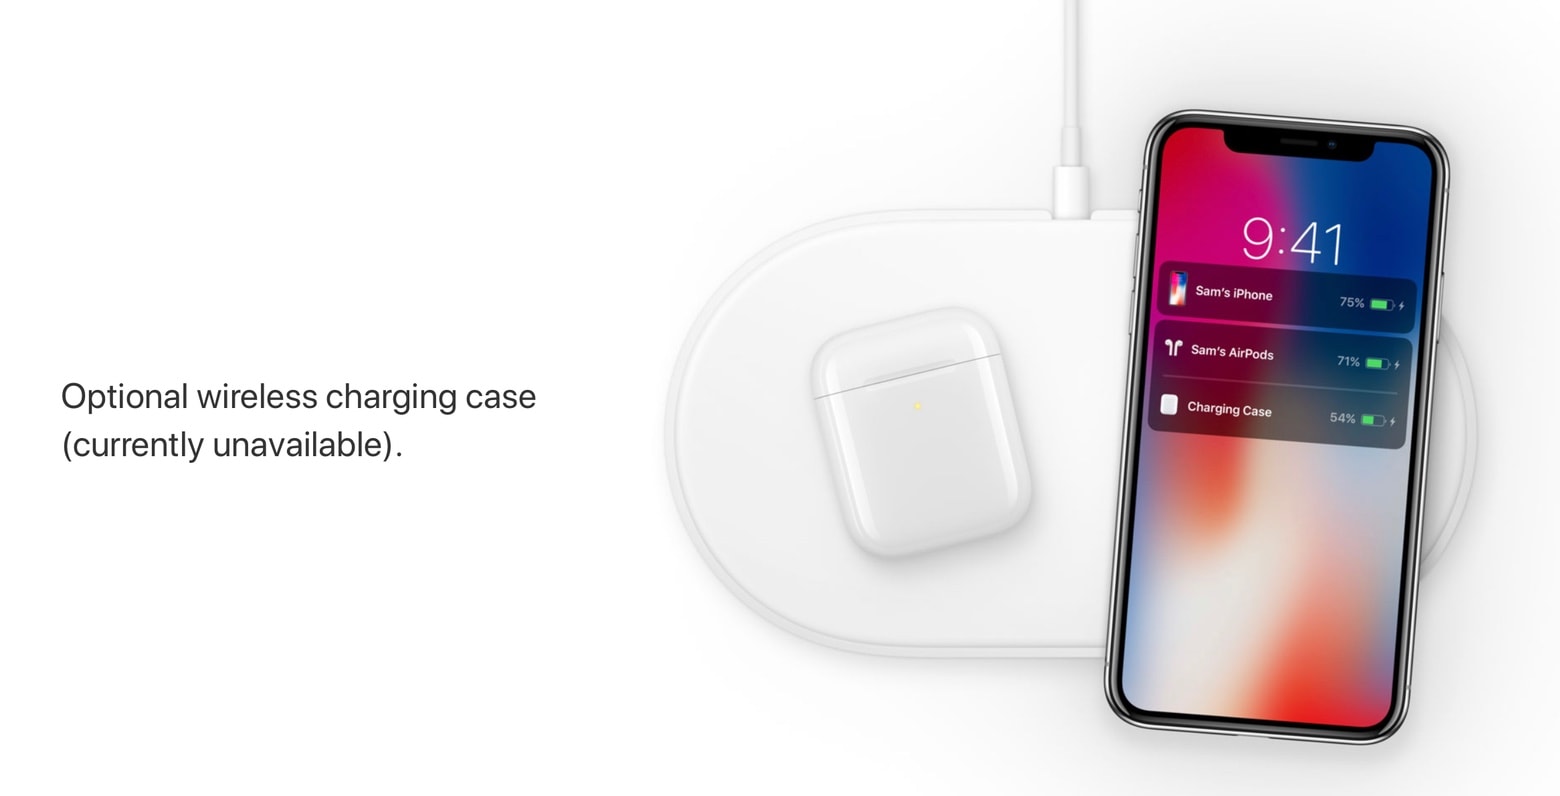 Why was this crusty old mage of AirPower removed from Apple’s website?